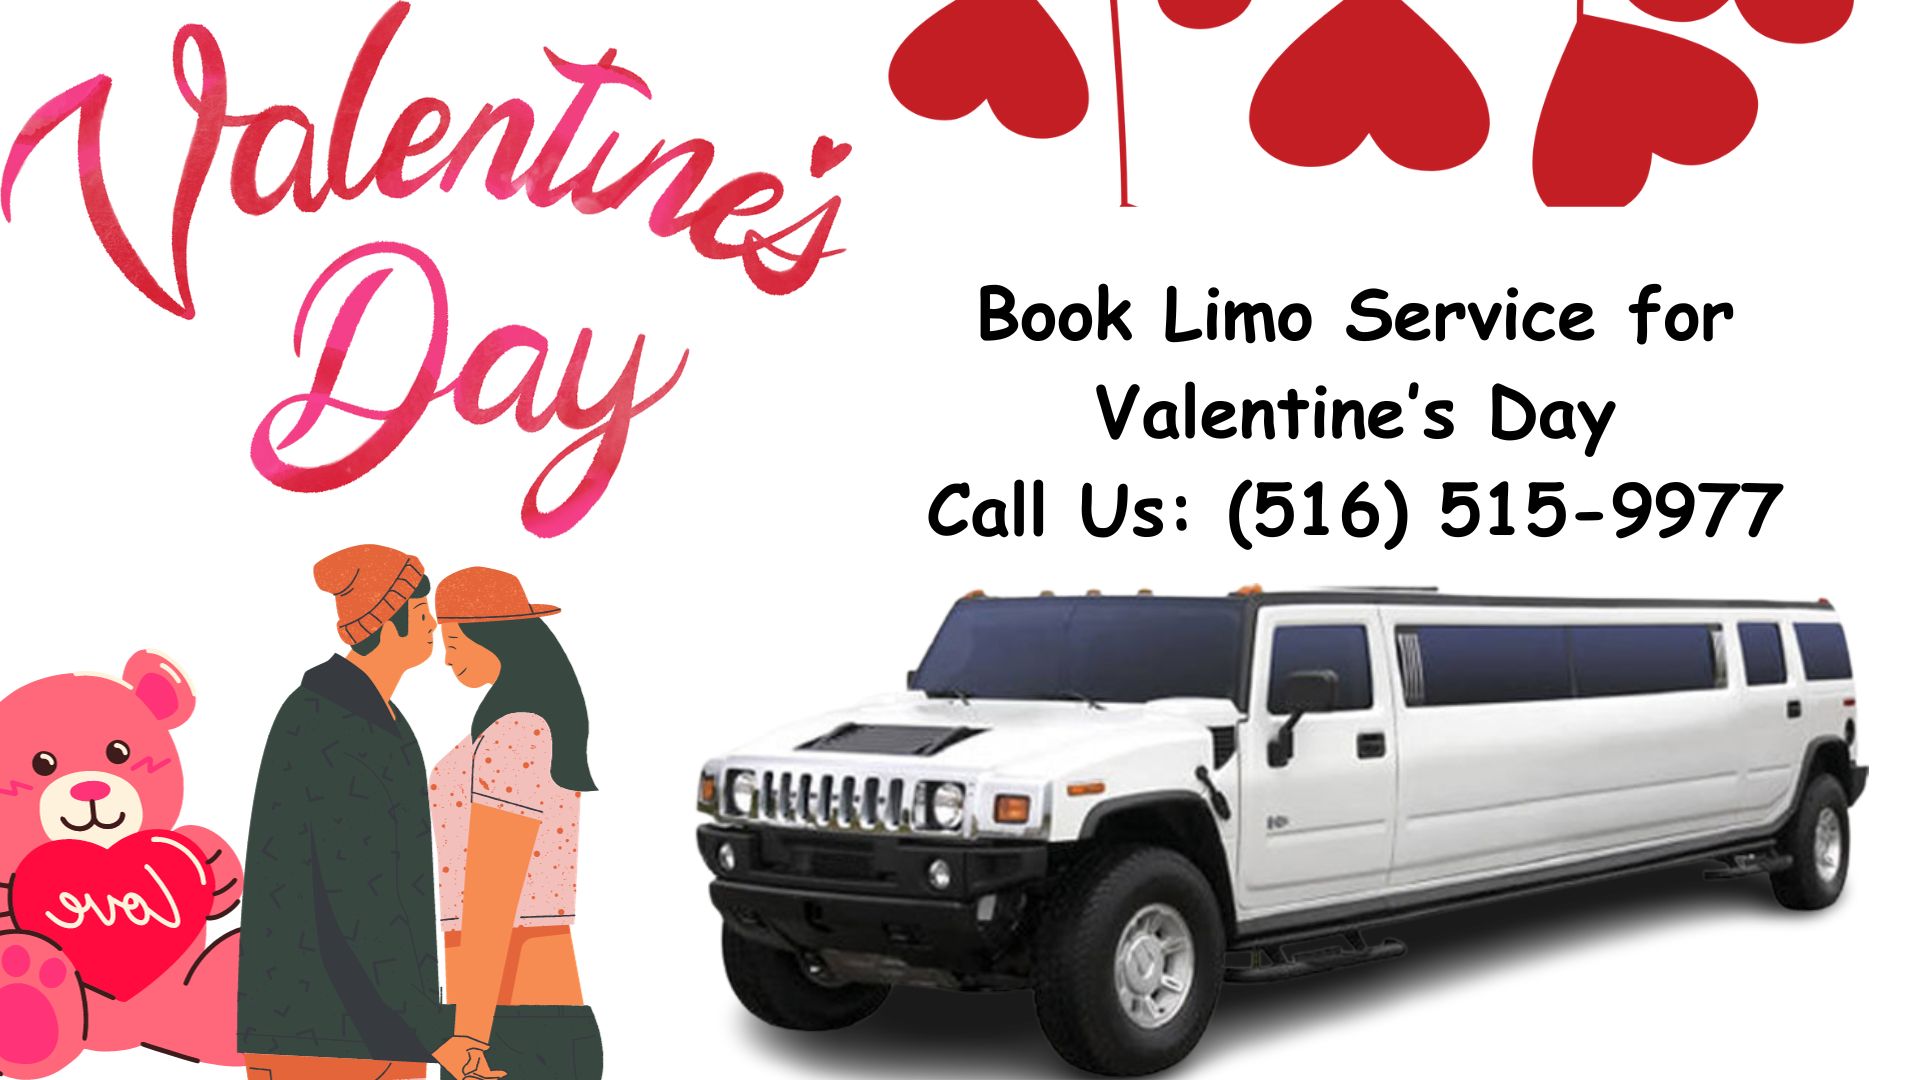 Book Limo Service for Valentine’s Day